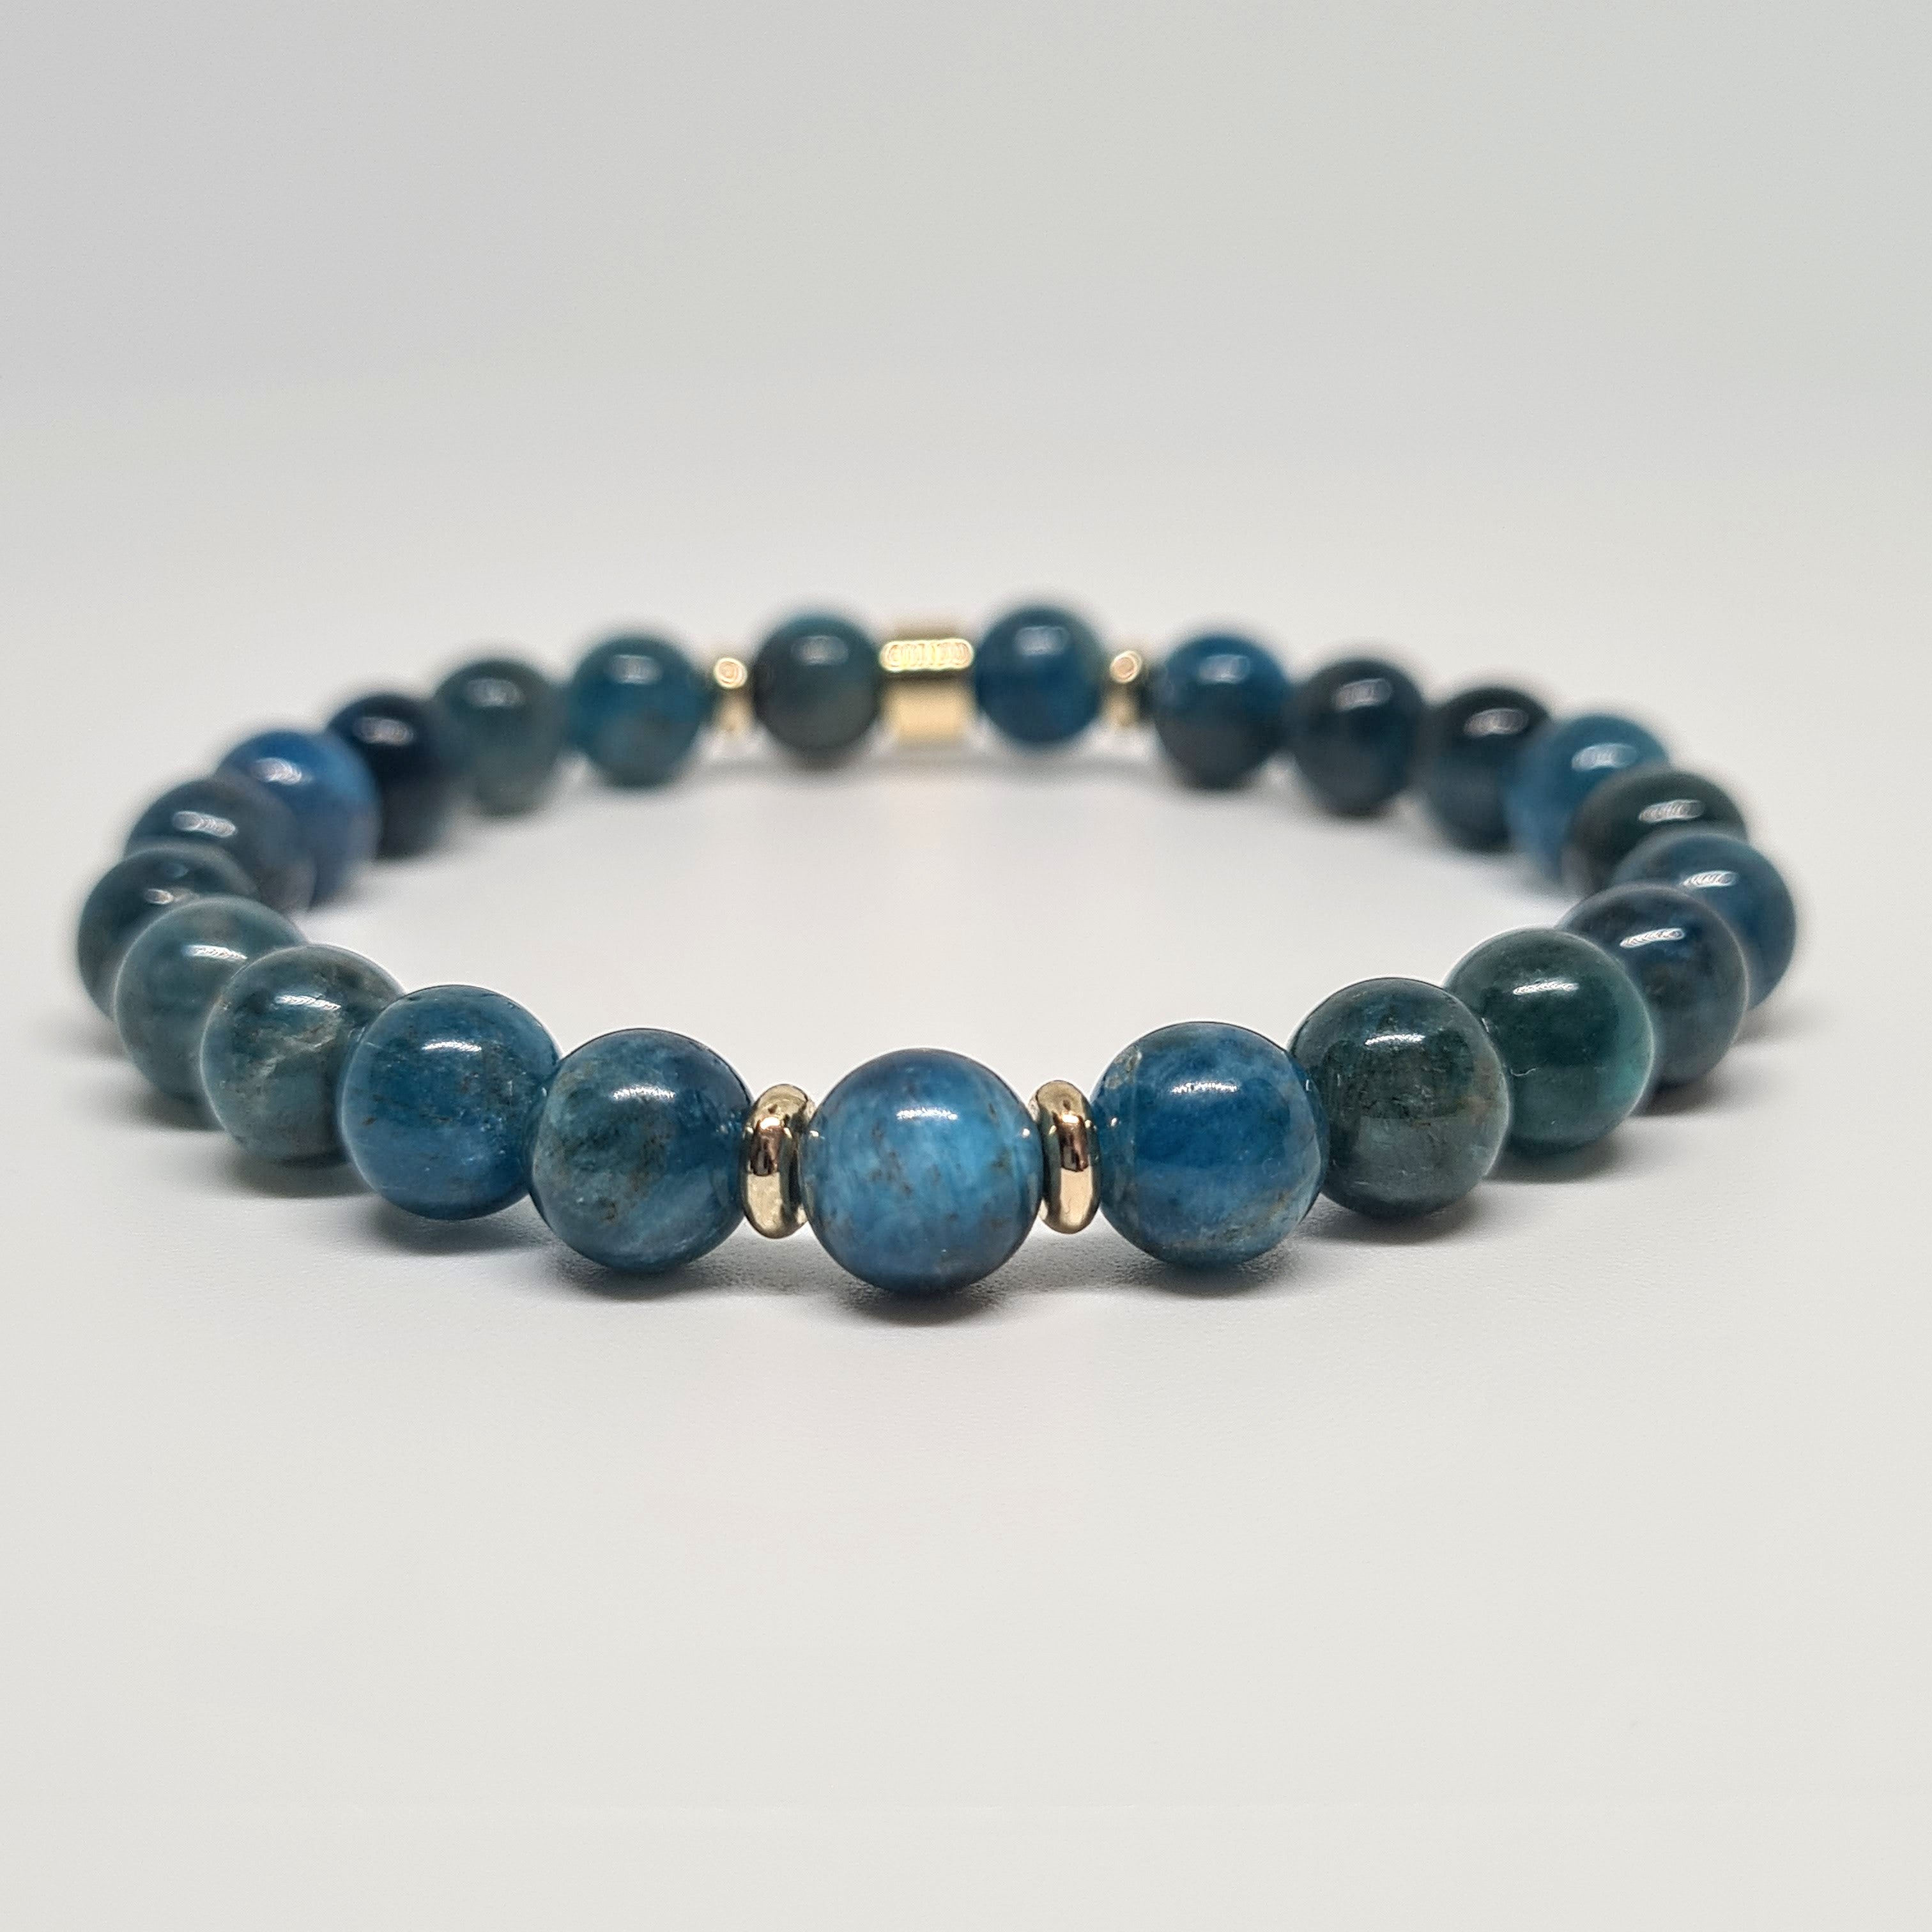 Apatite gemstone bracelet in 8mm with gold accessories